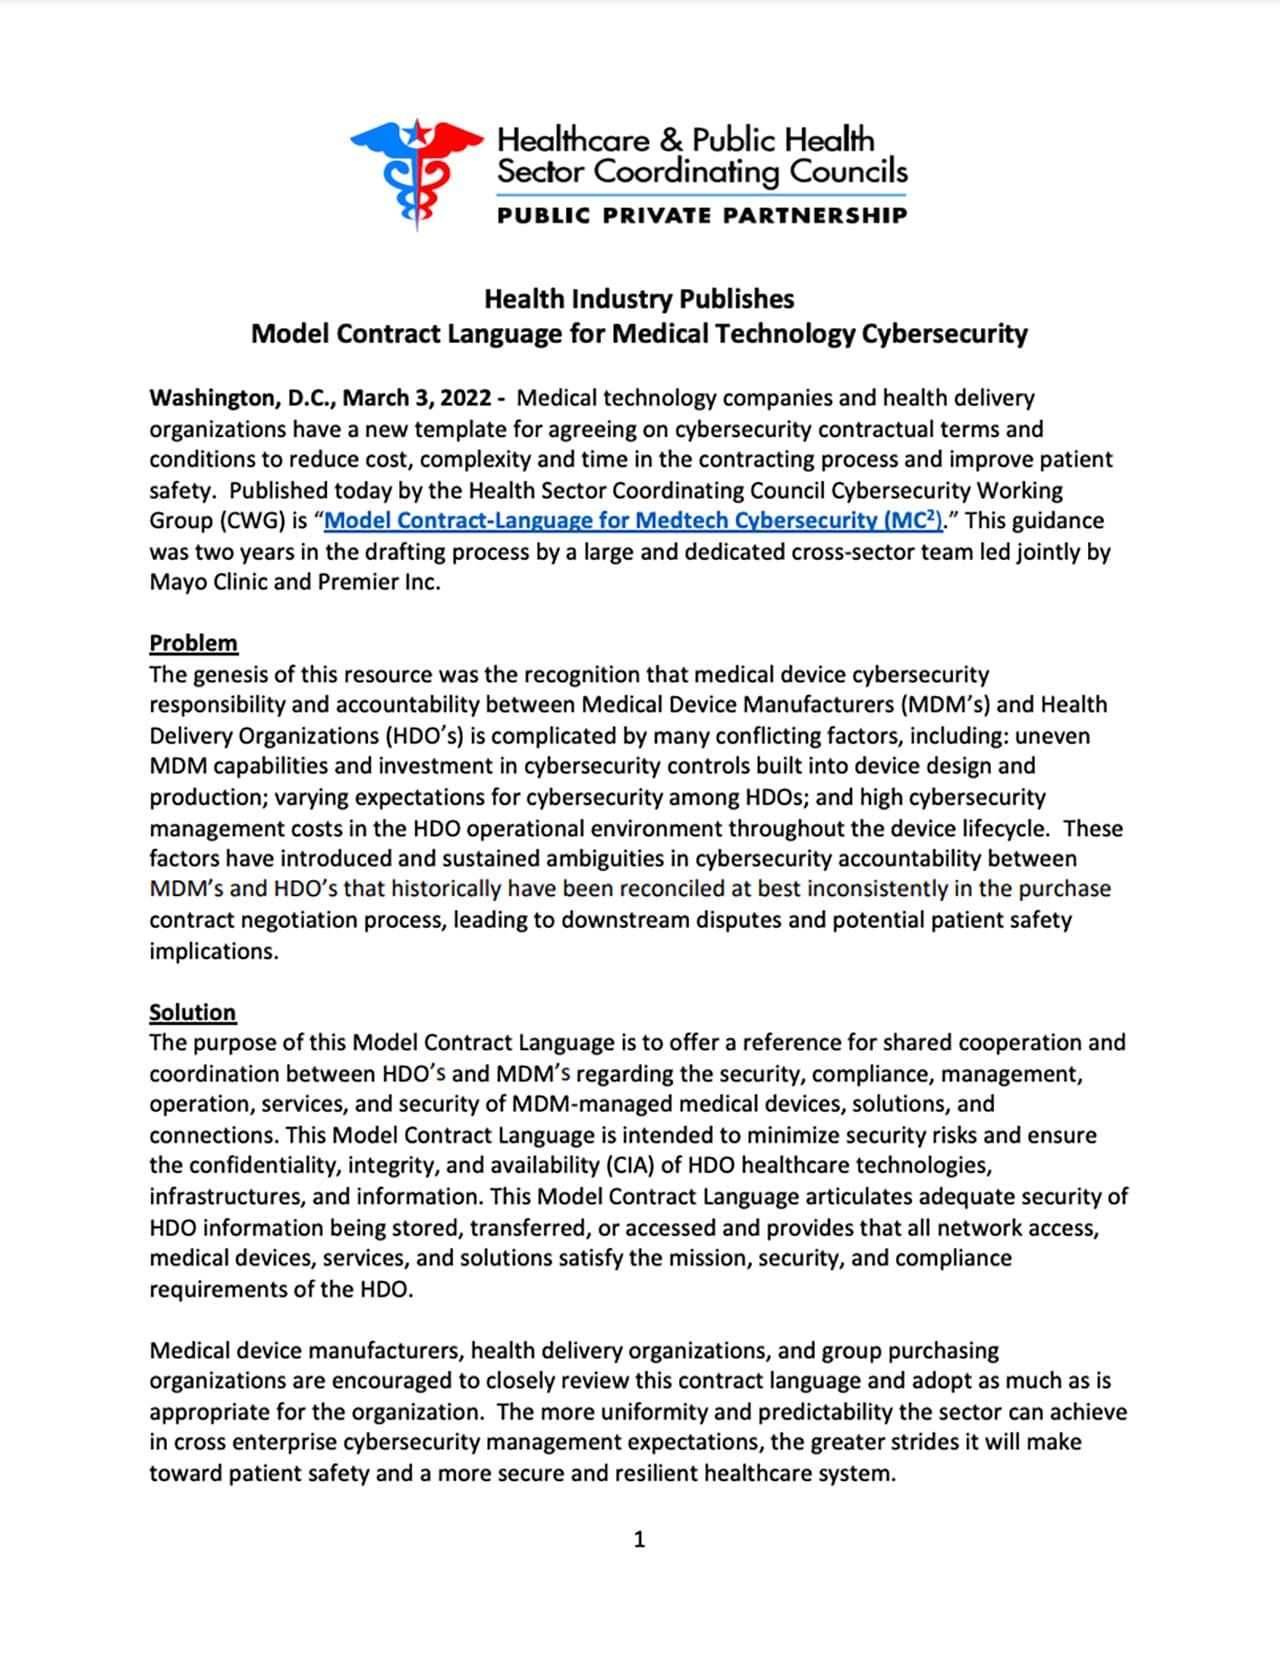 03/03/2022: Health Industry Publishes Model Contract Language for Medical Technology Cybersecurity